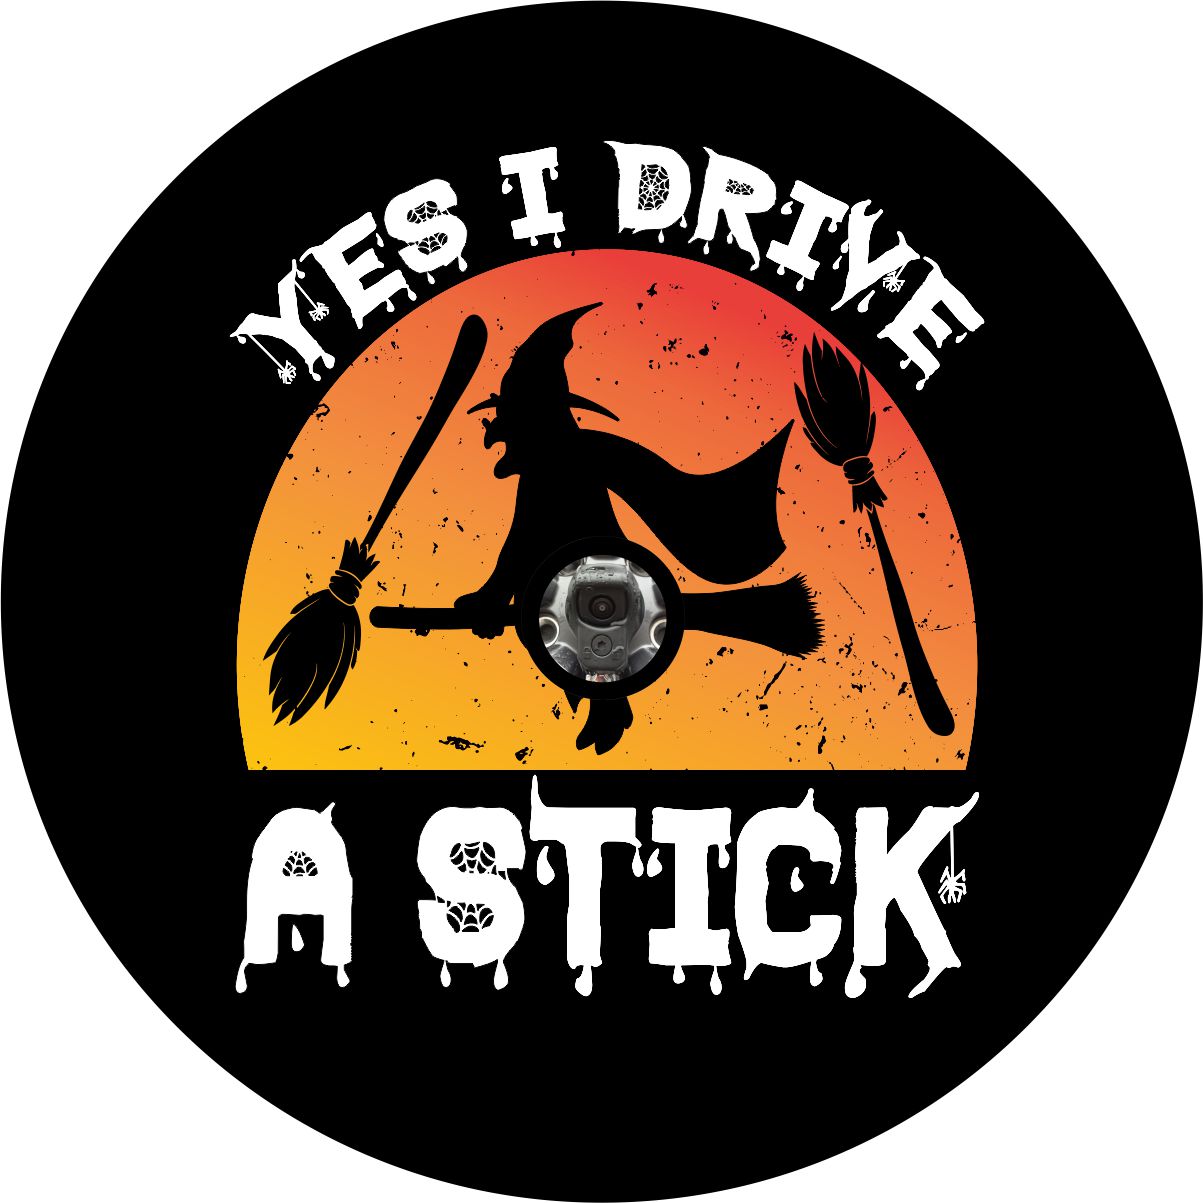 Silhouette of a watch flying on a broom with orange gradient and the saying "yes I drive a stick" in spooky text as a spare tire cover design for Jeep, RV, Bronco, Camper, and more with a back up camera